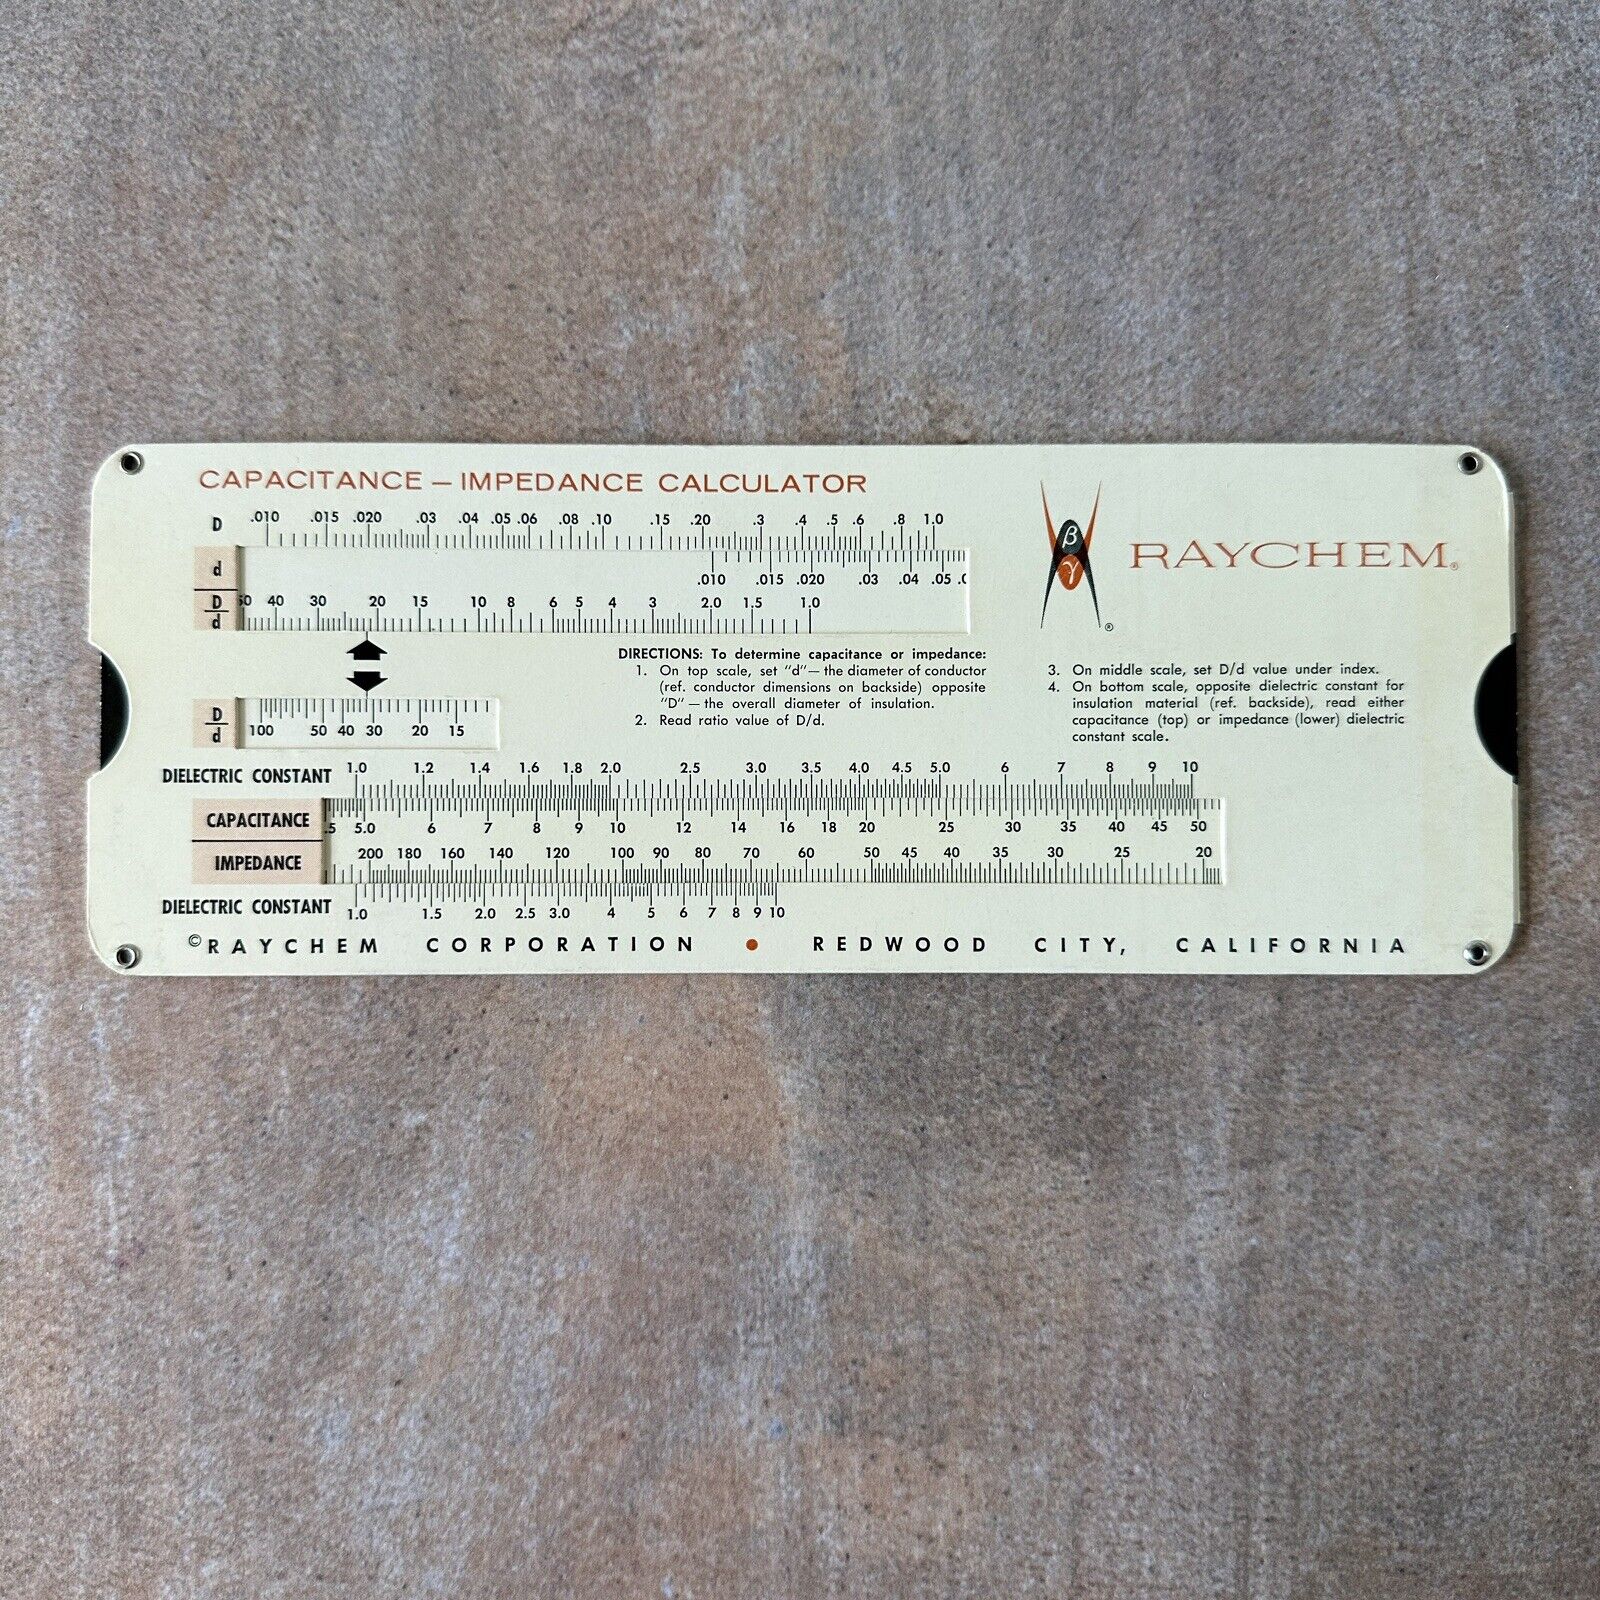 Vintage Raychem Slide Rule Capacitance - Impedance Calculator 1963 Coaxial Cable